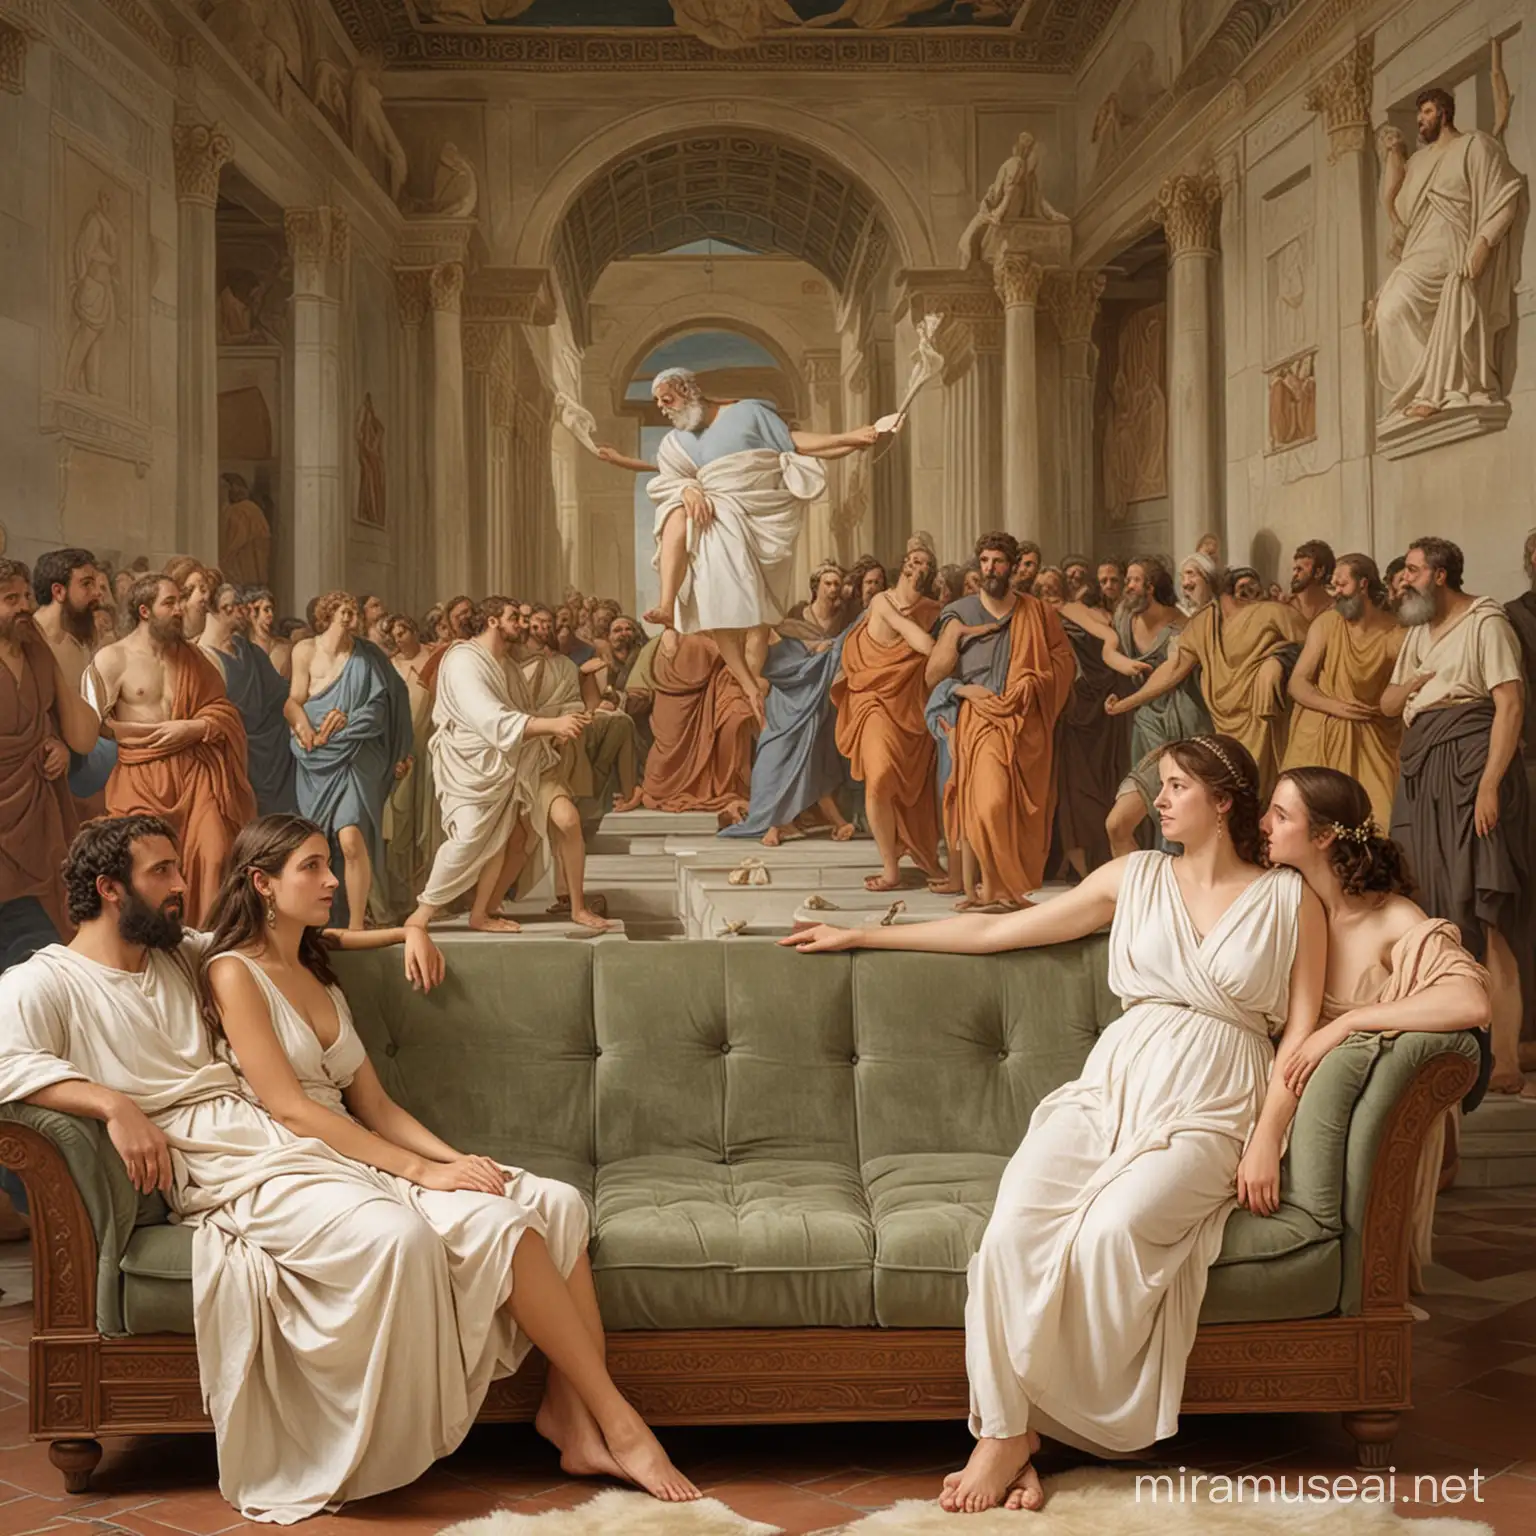 a reenactment of Plato's symposium, with greeks leaning on sofas giving speeches about love